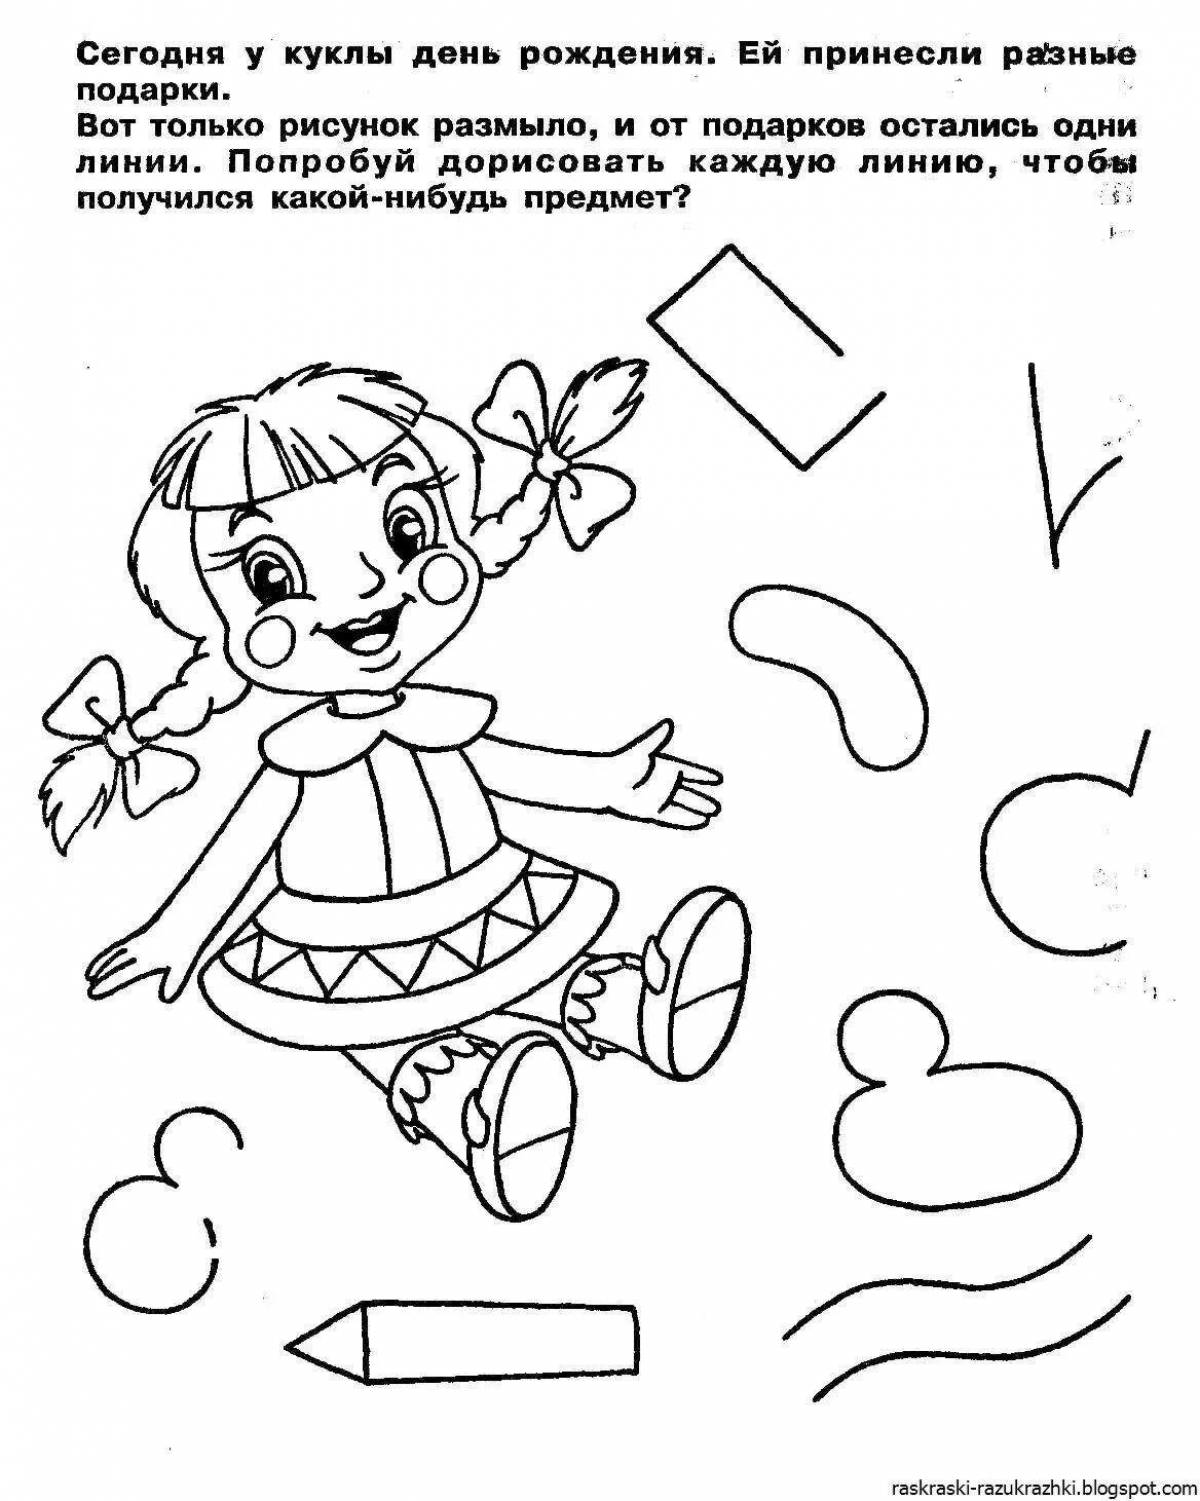 Fun coloring games for girls 5 years old in Russian